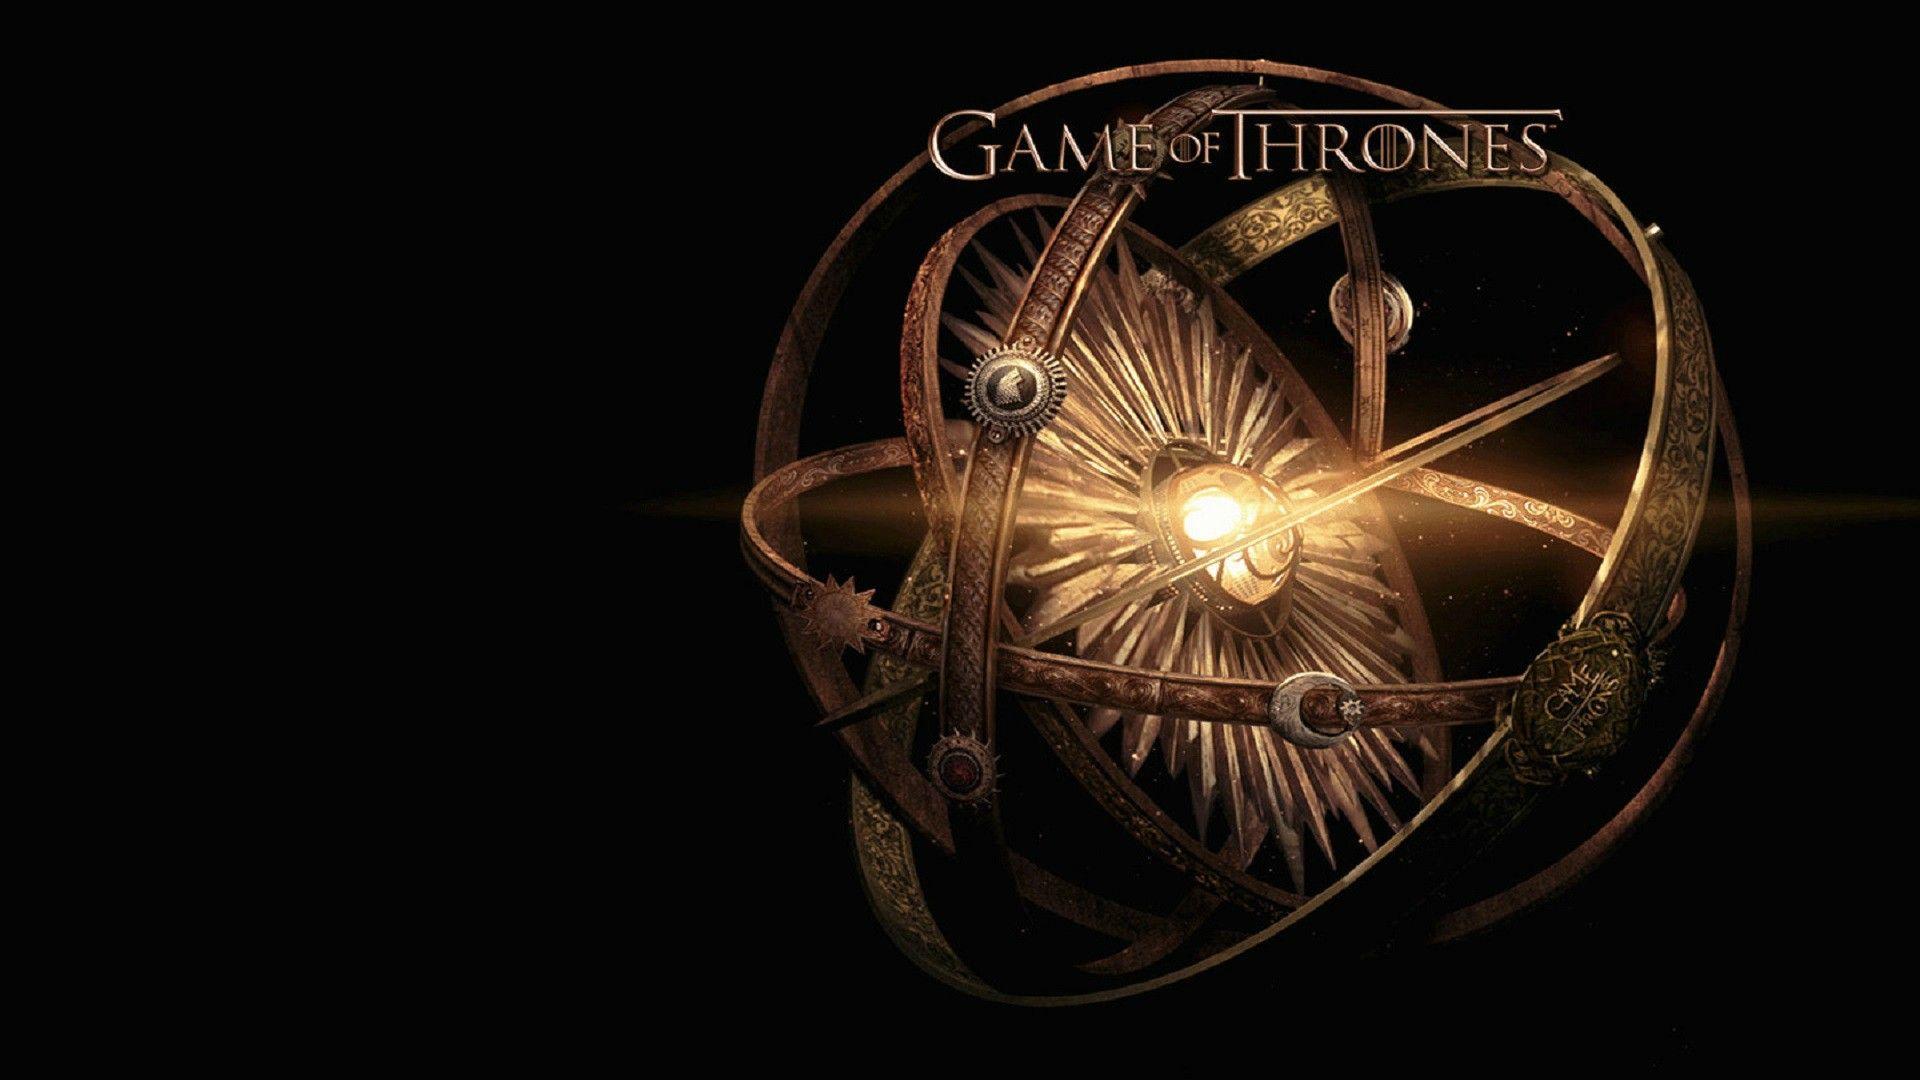 Game Of Thrones Season 8 Wallpaper 4K/HD For Mobile and PC